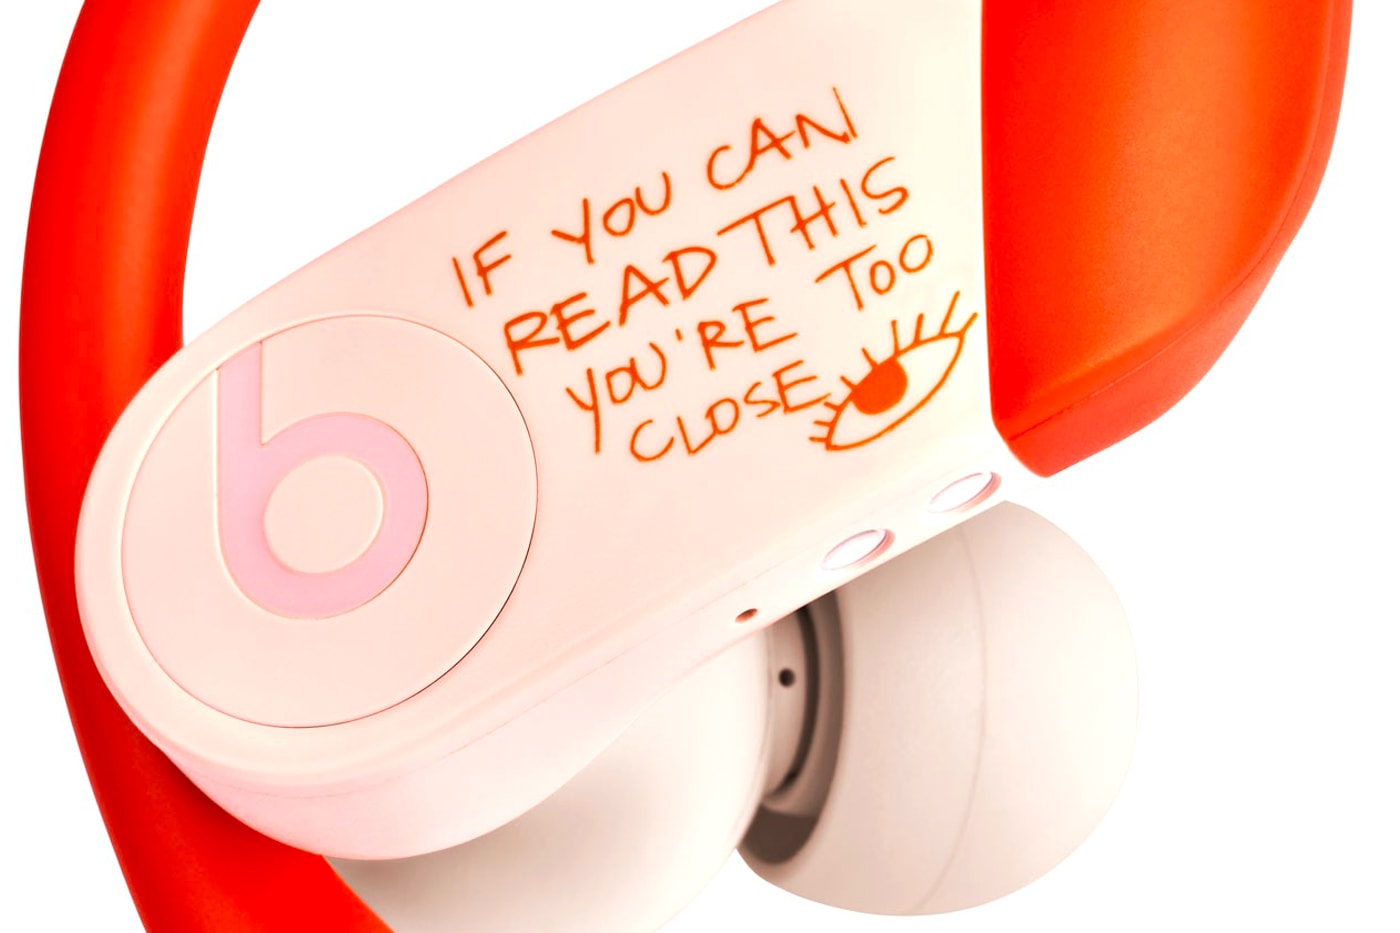 Beats Links Up With Melody Ehsani for Limited-Edition Powerbeats Pro Tech